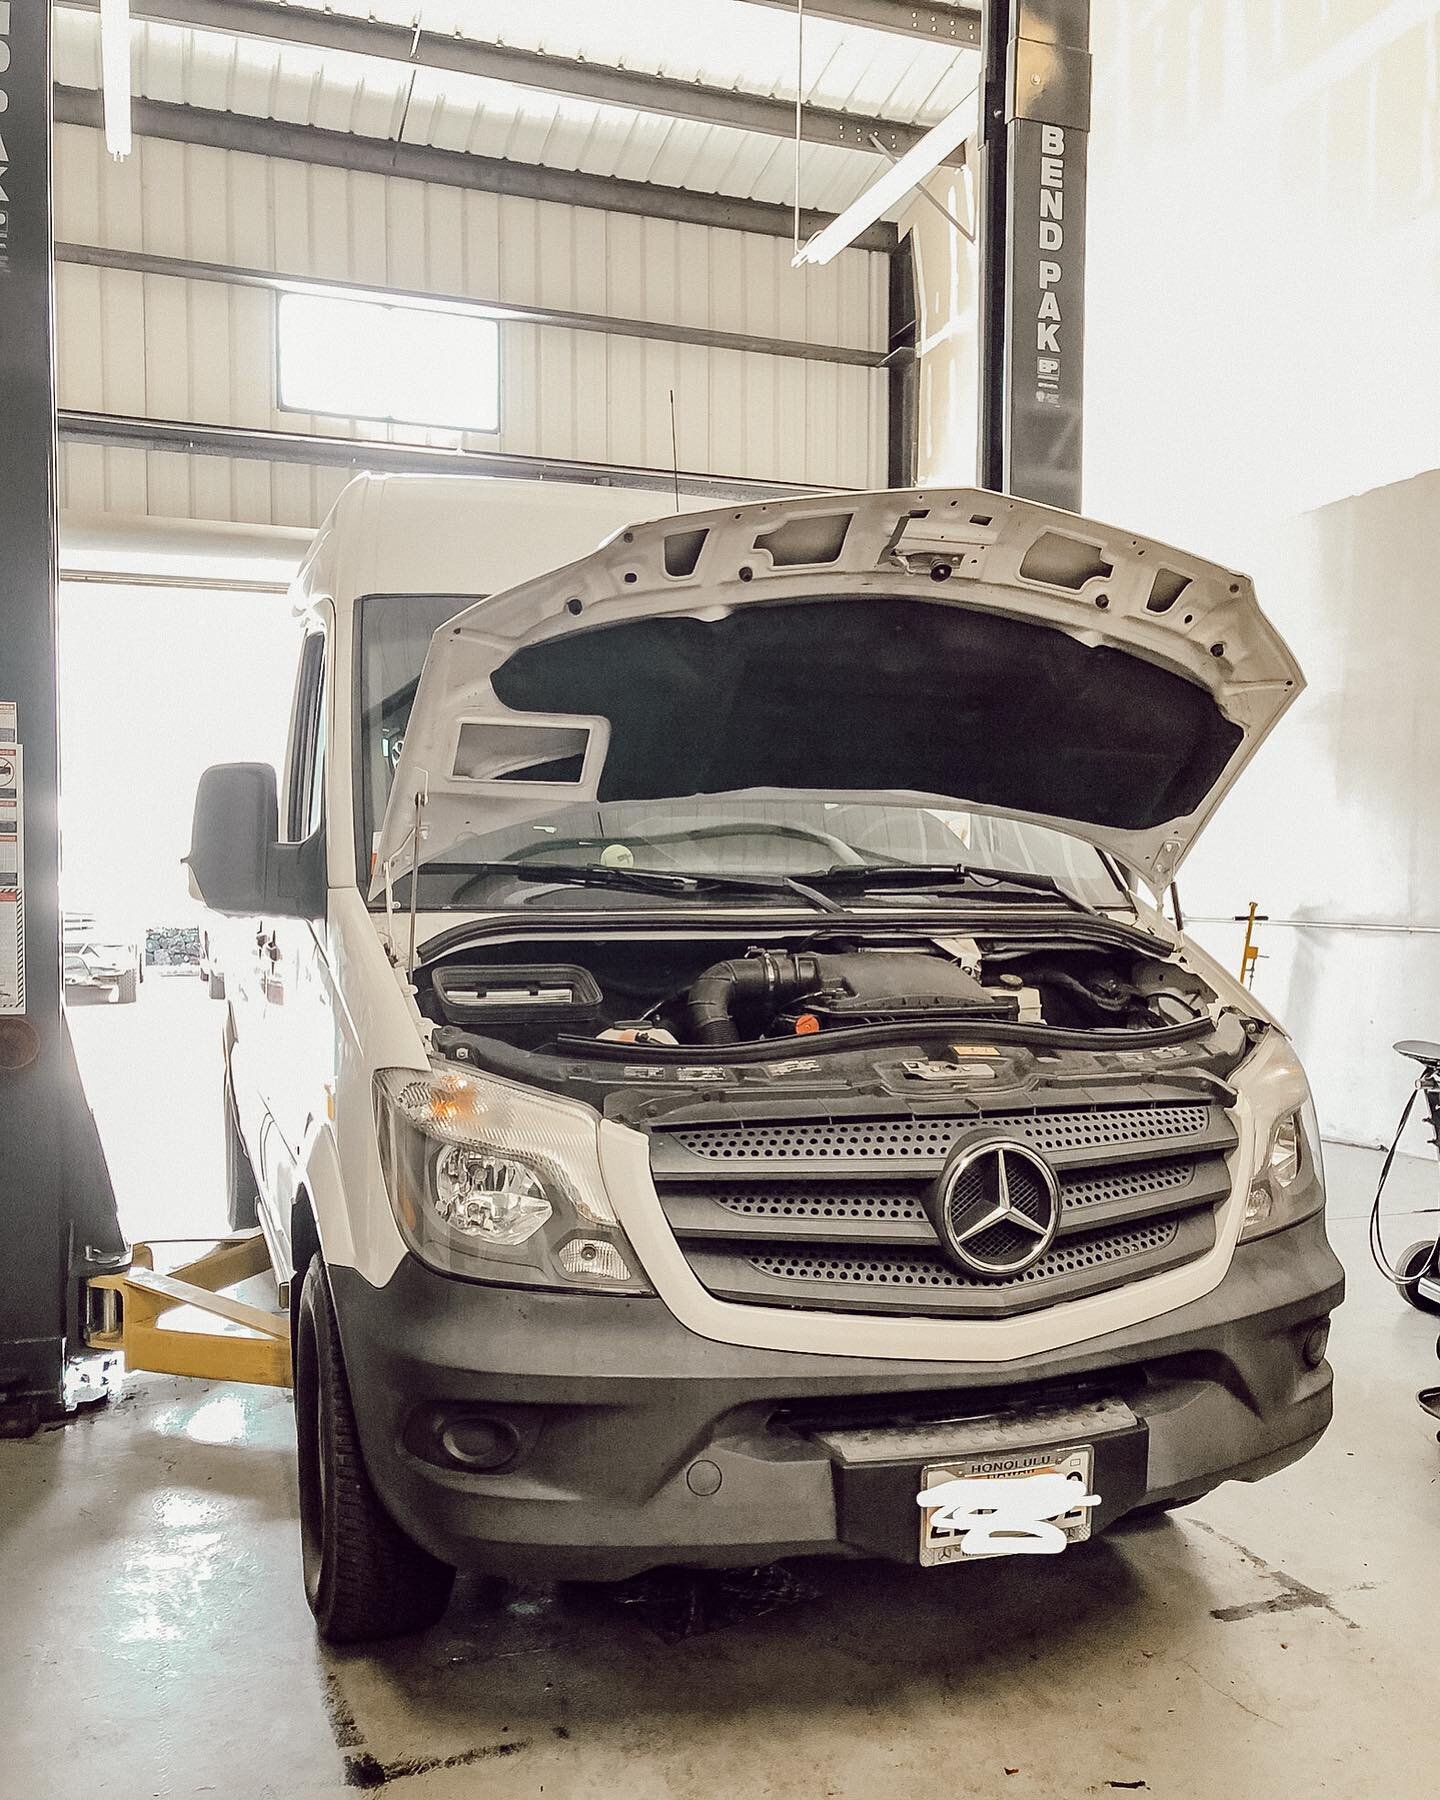 Changing out the compressor on this #mercedessprinter for Kohala Beach Buggies

#hawaiifleetspecialists #hawaiifleetspecialistsllc #diesel #dieselmechanic #dieseltrucks #dieselvans #dodge #ram #ford #chevy #chevrolet